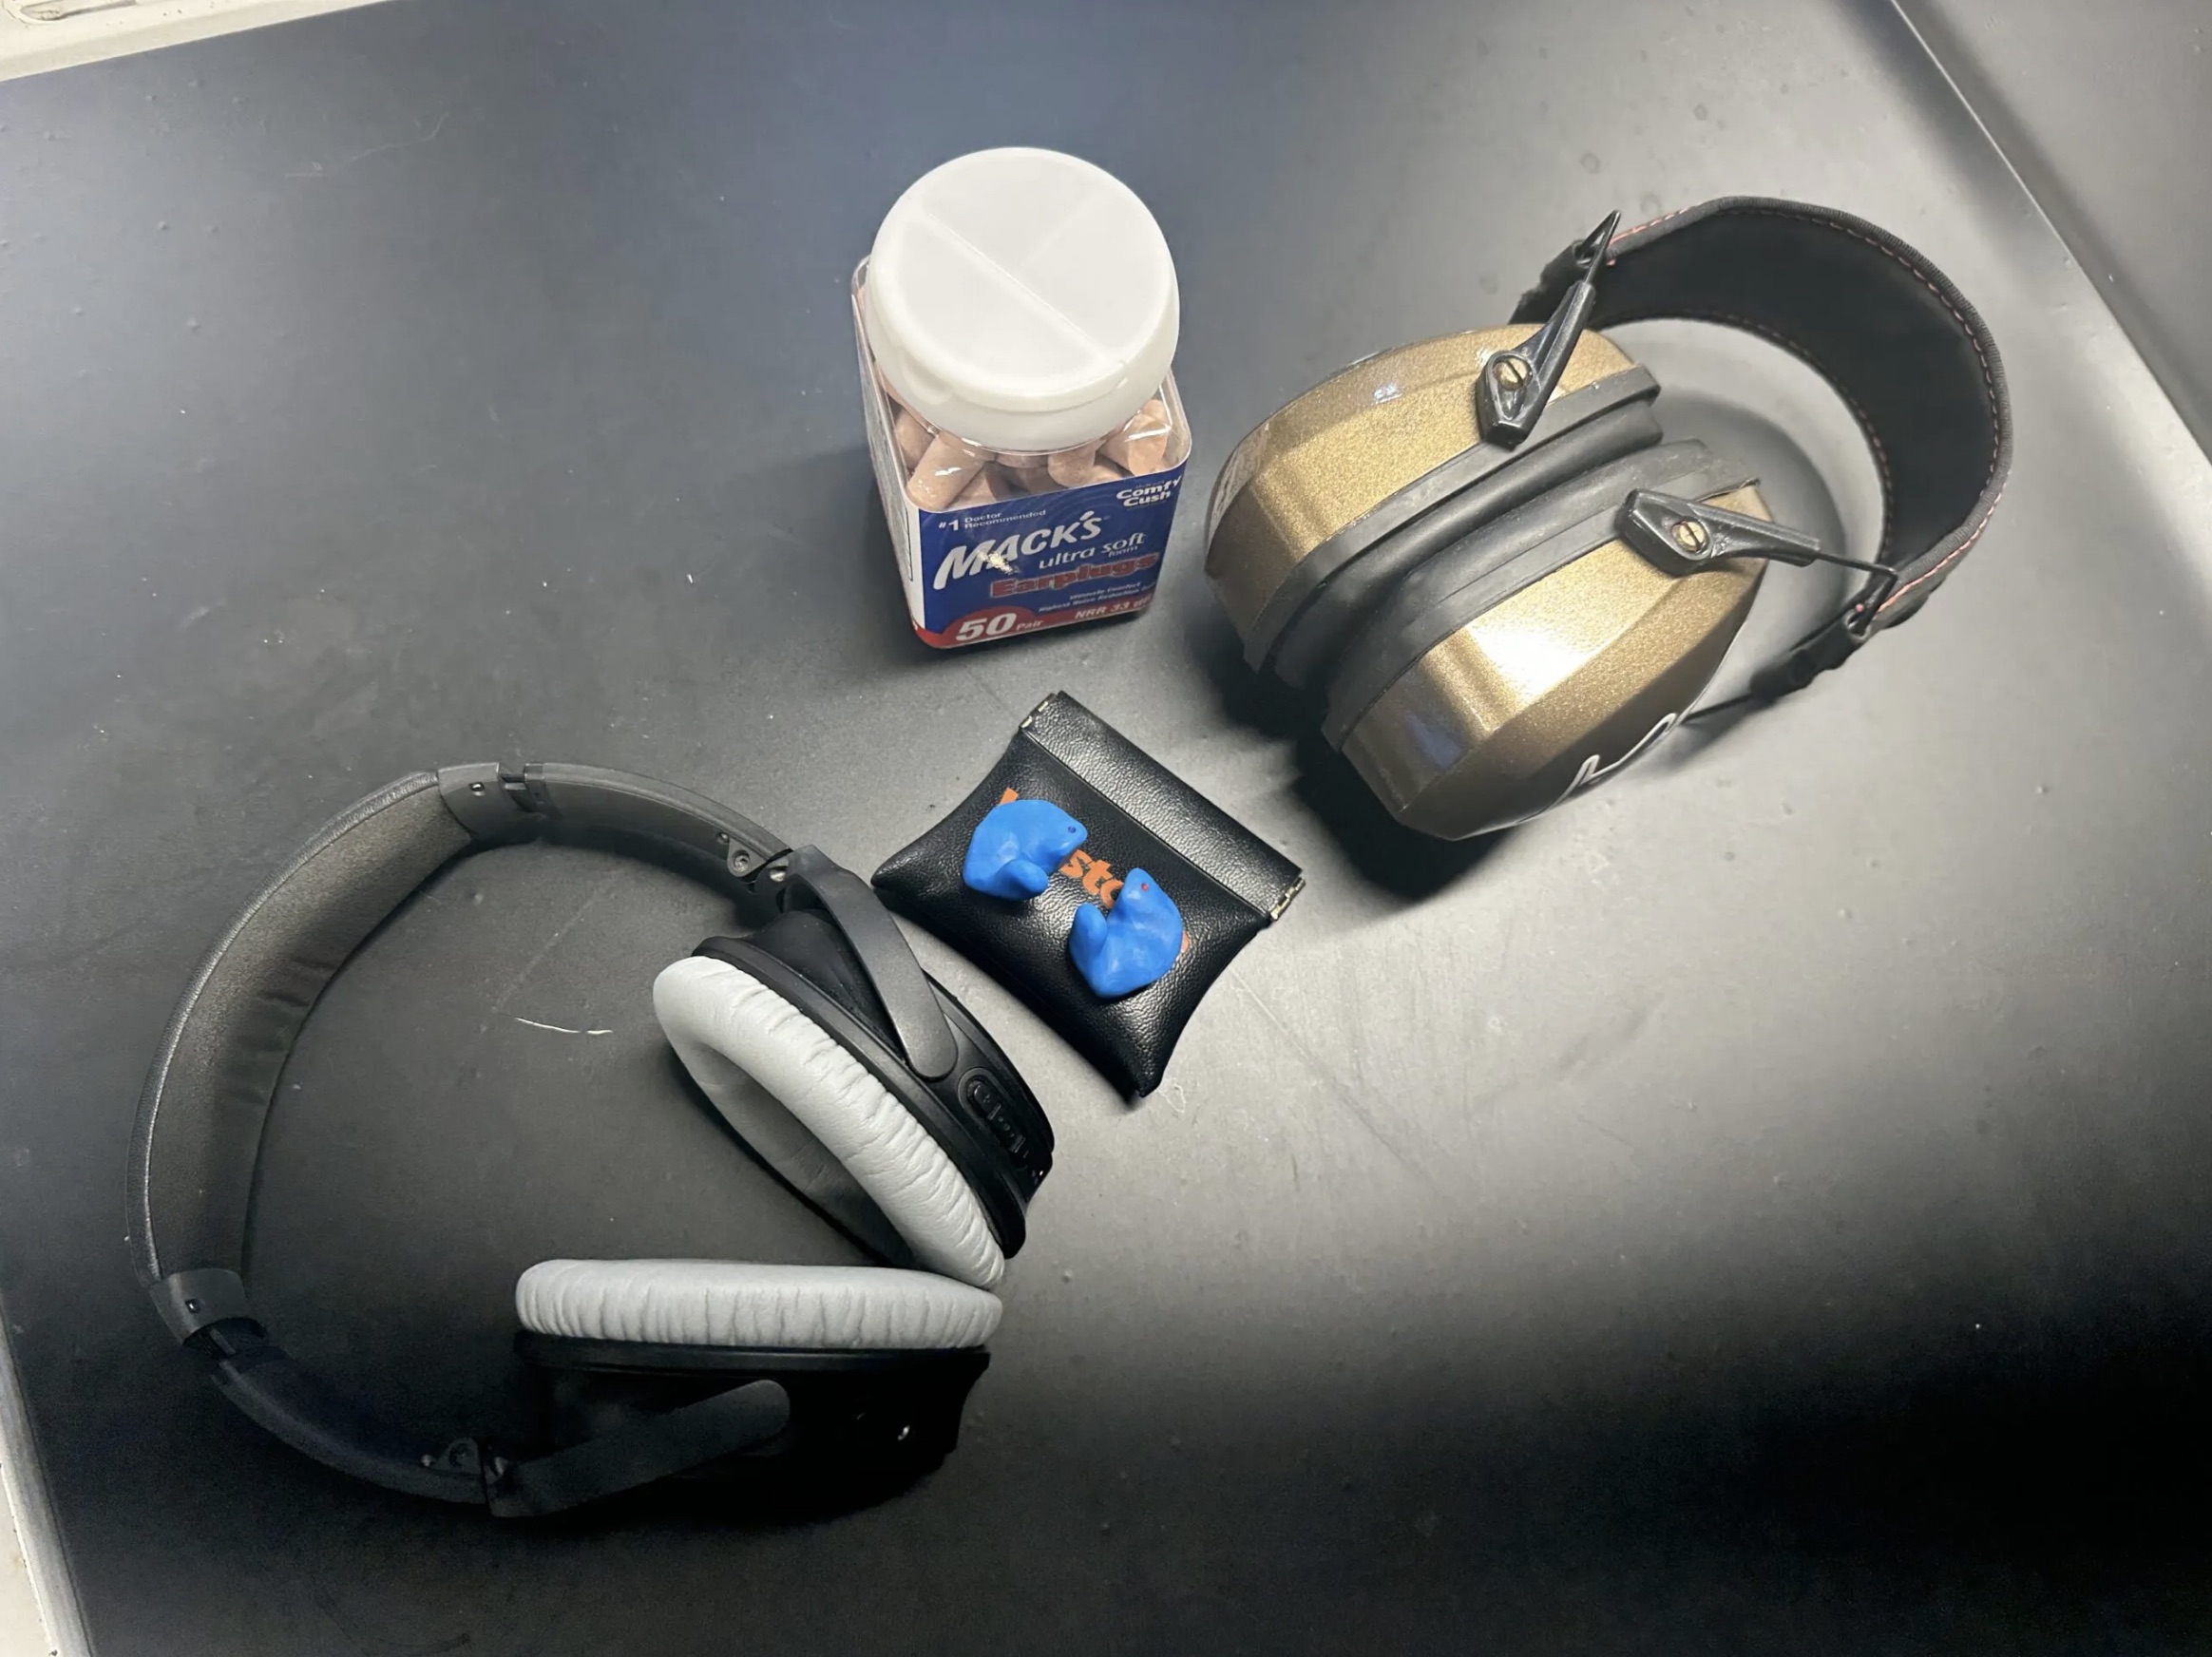 4 types of hearing protection any shop should have